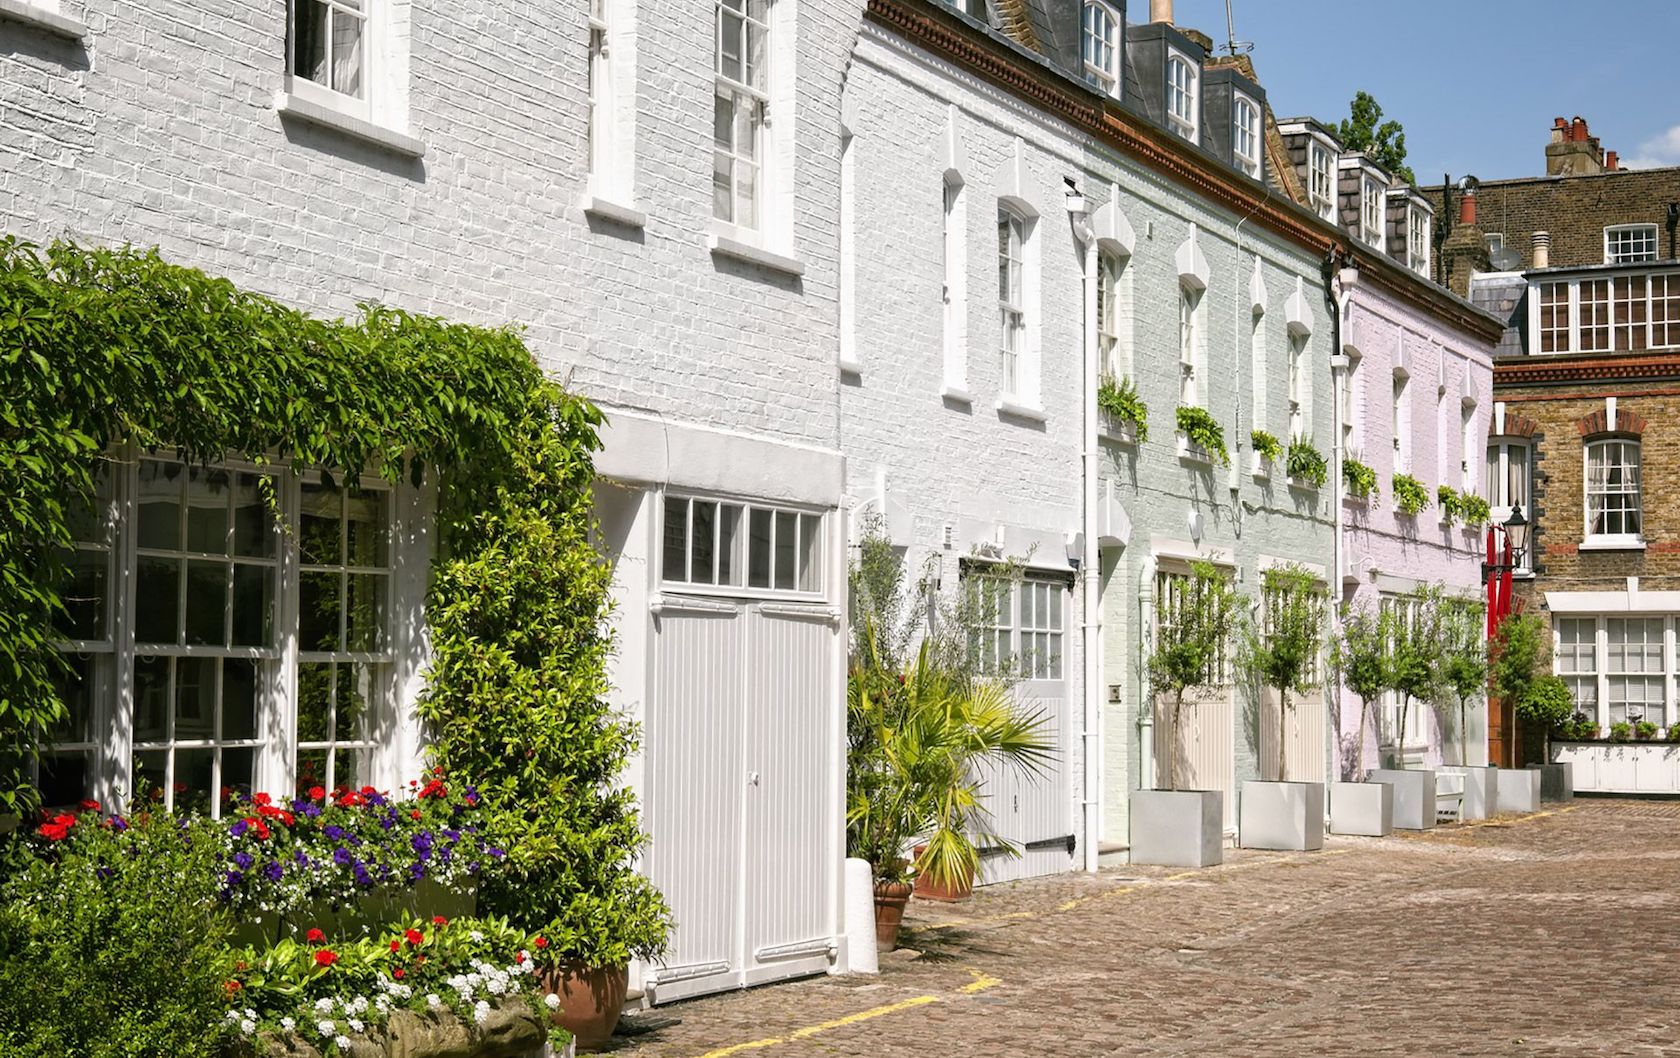 Mews rentals in London by London Perfect